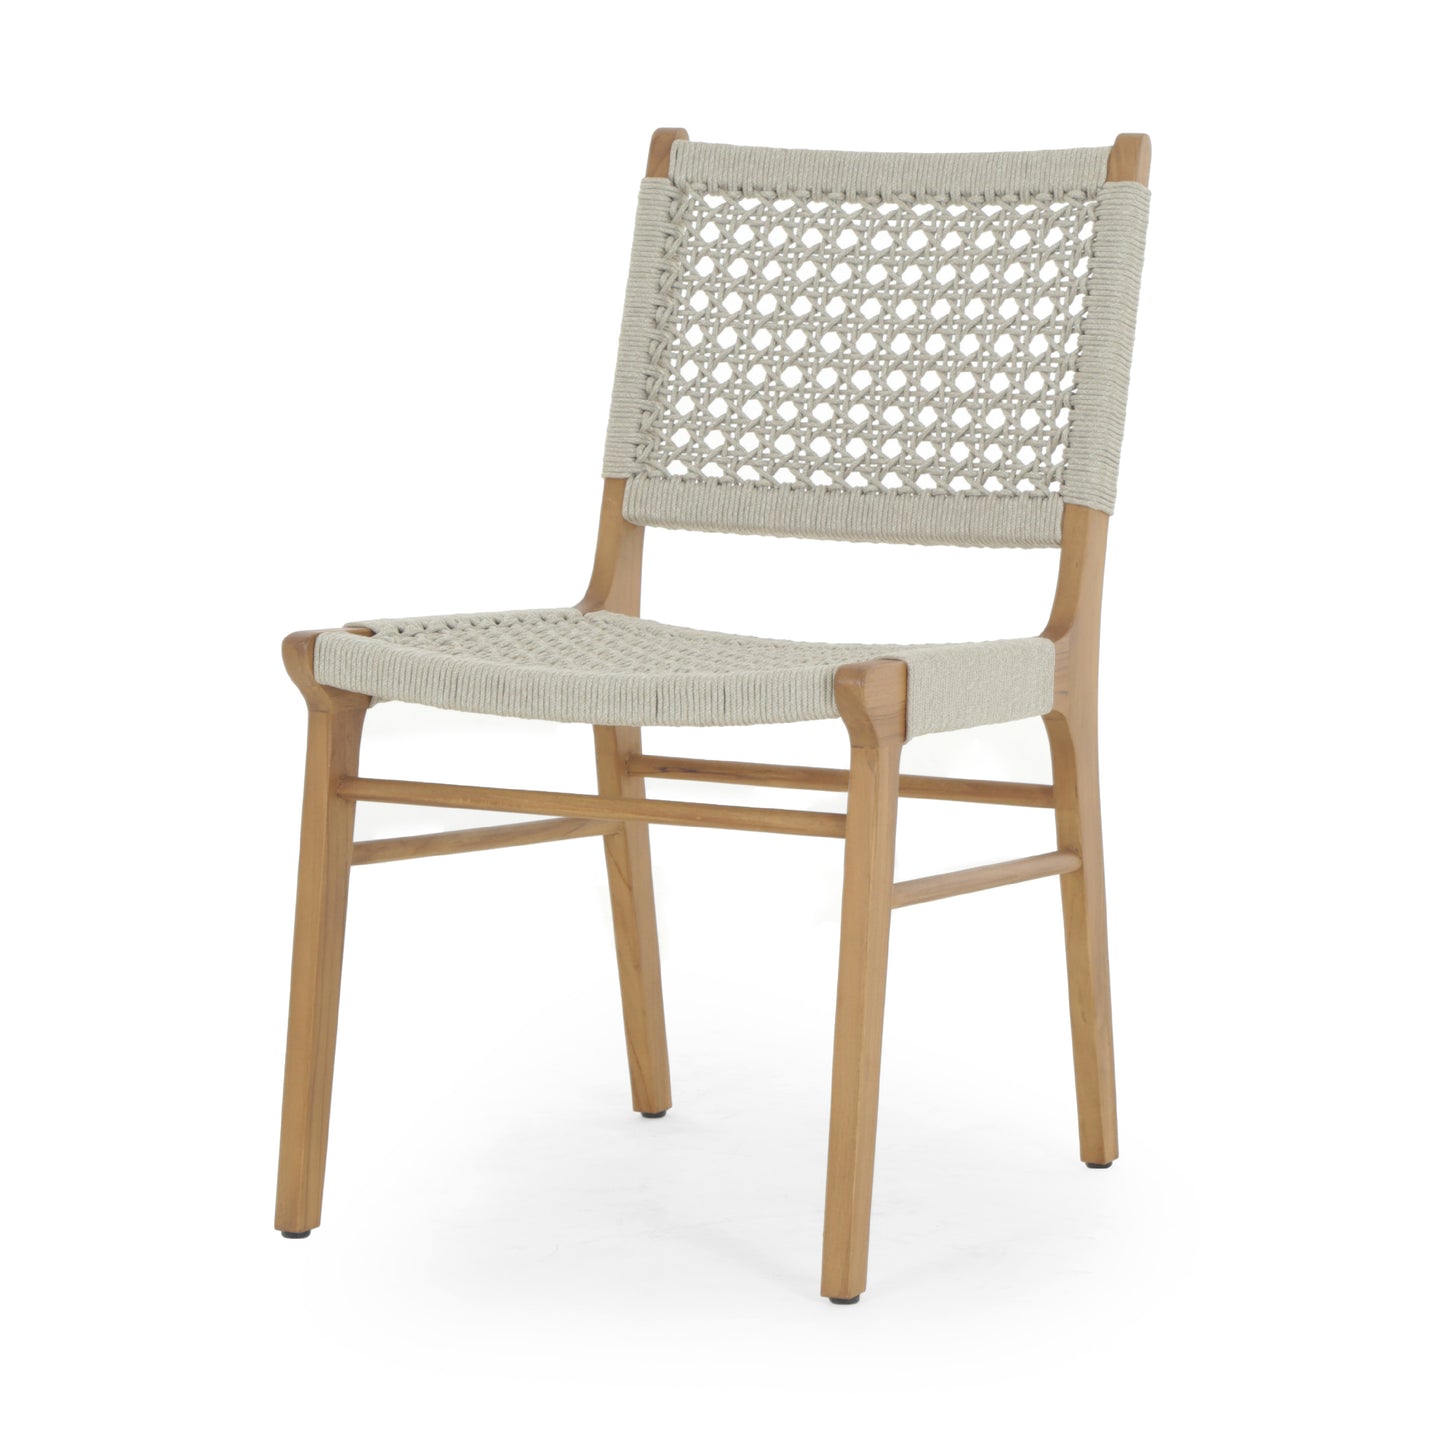 Delmar Outdoor Dining Chair NaturalOutdoor Chairs Four Hands  Natural   Four Hands, Mid Century Modern Furniture, Old Bones Furniture Company, Old Bones Co, Modern Mid Century, Designer Furniture, https://www.oldbonesco.com/